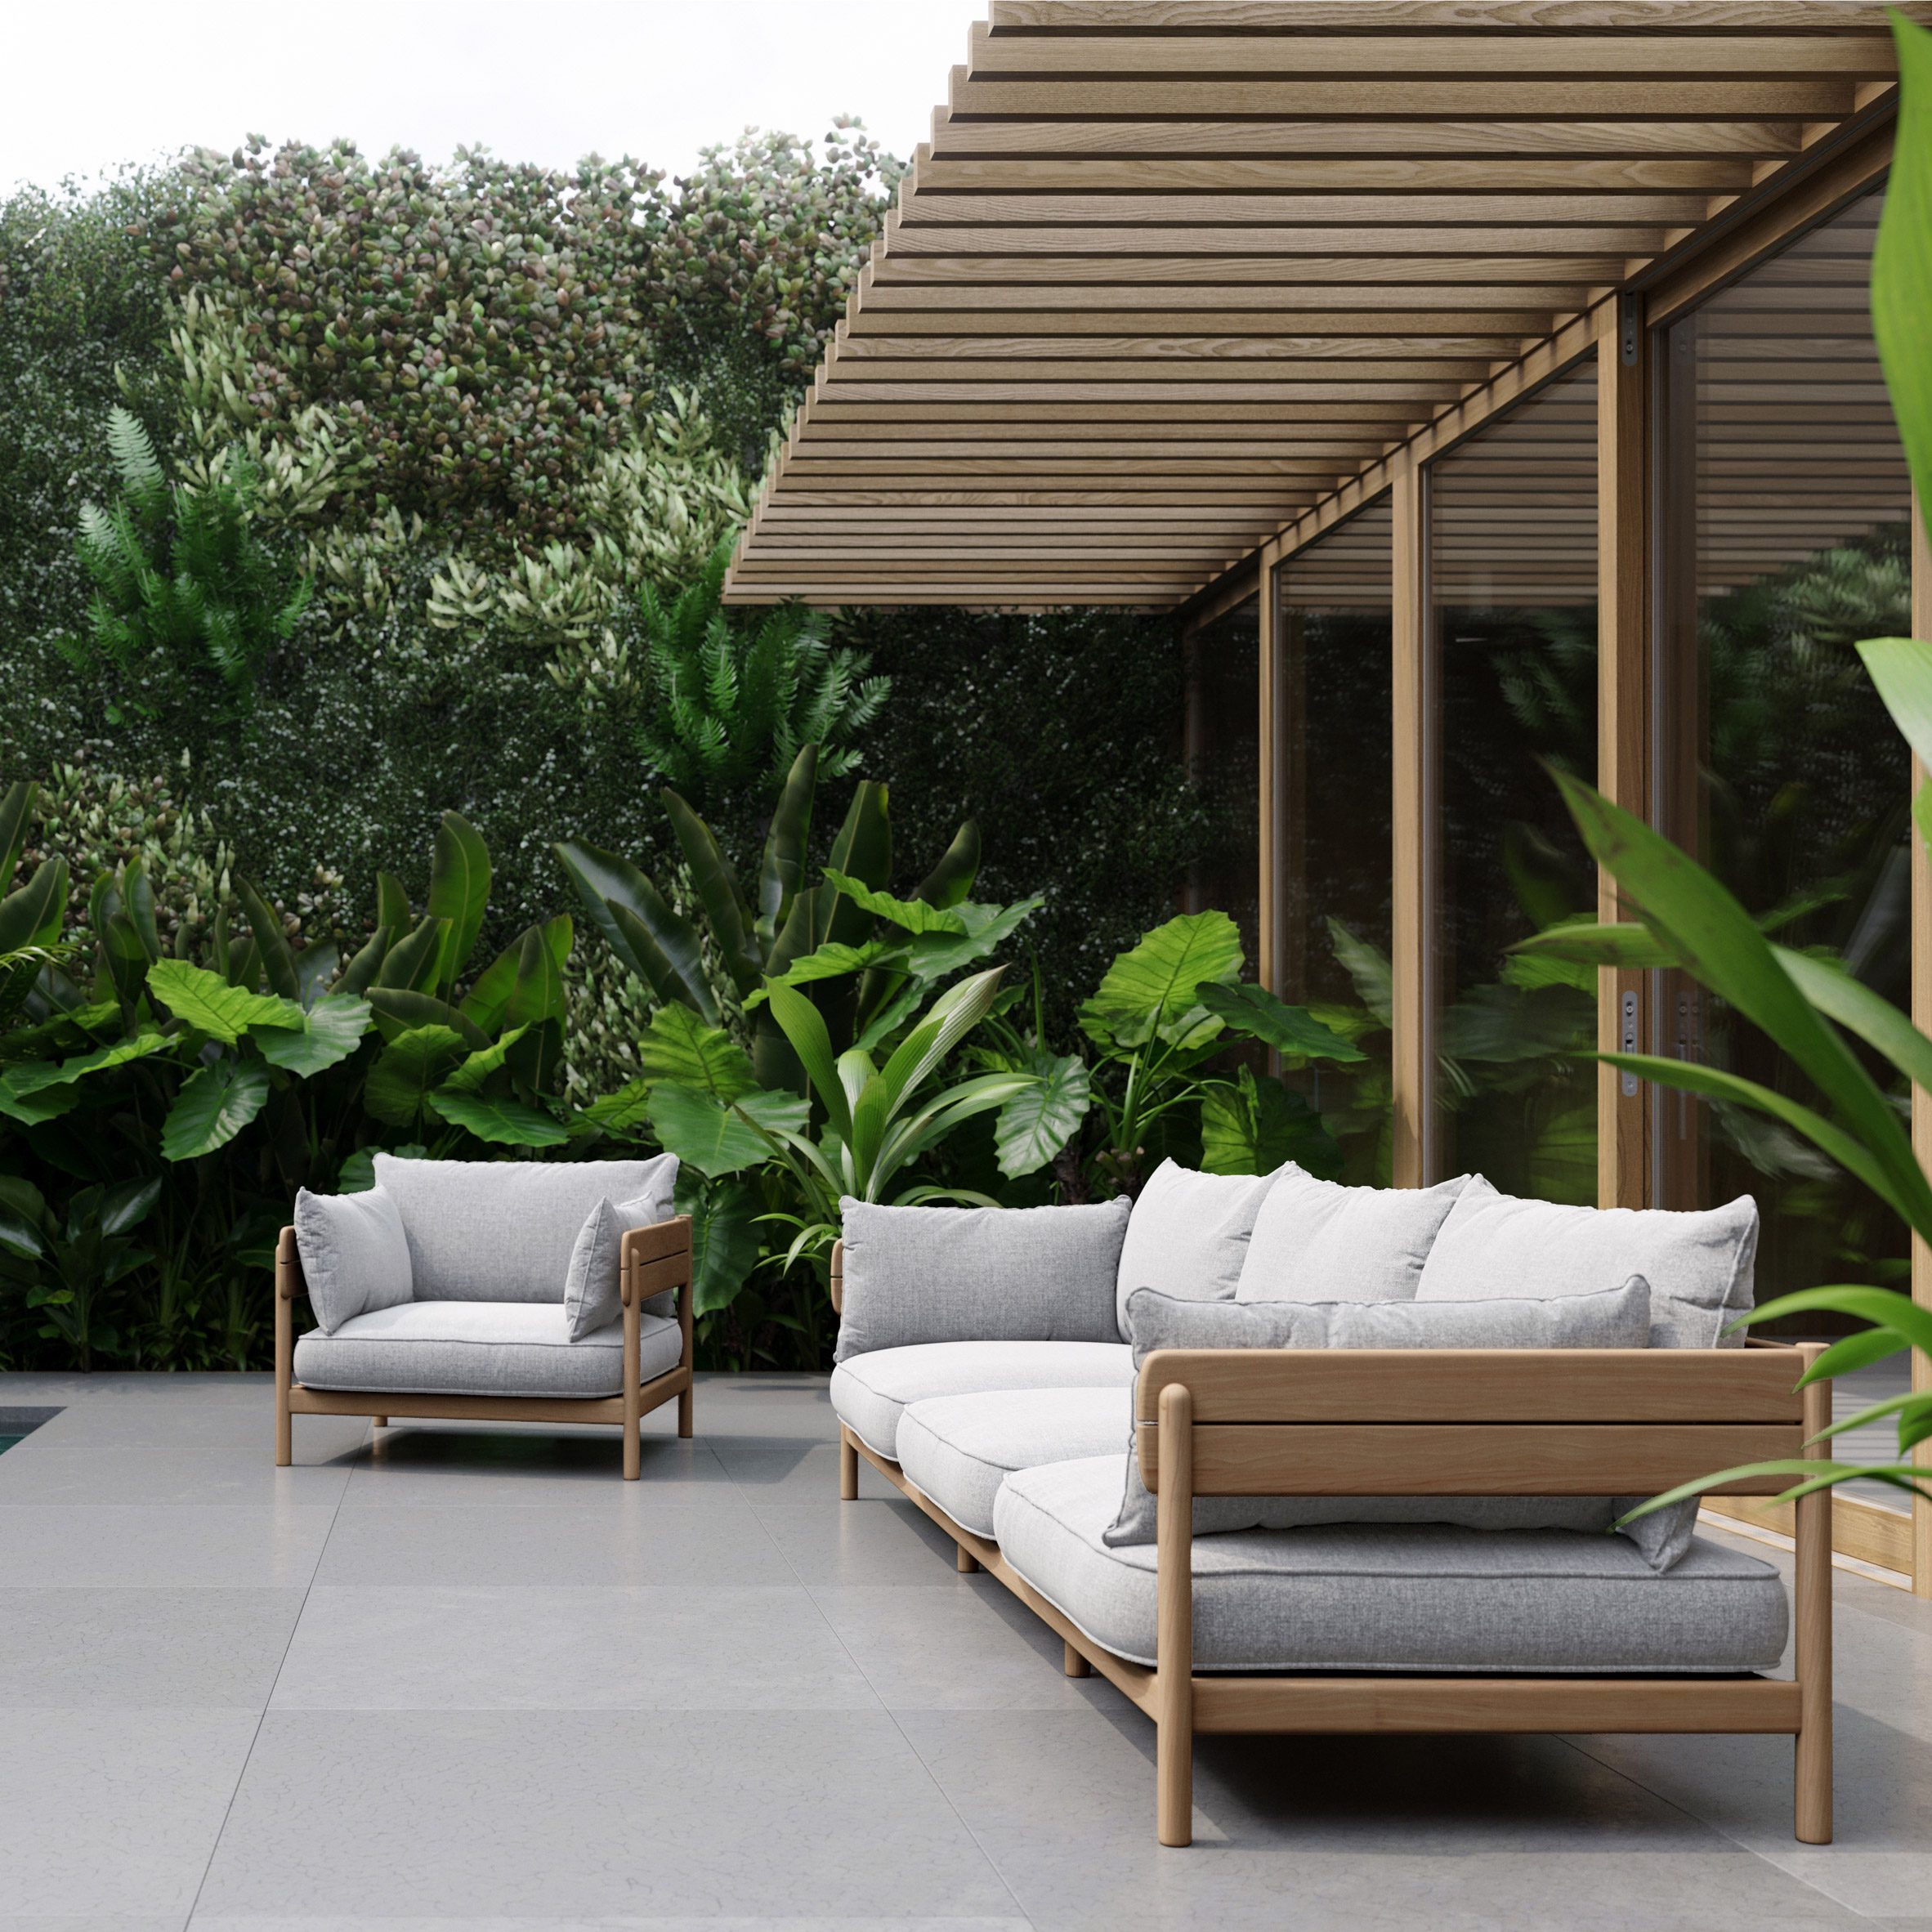 Tanso outdoor sofa by David Irwin for Case Furniture